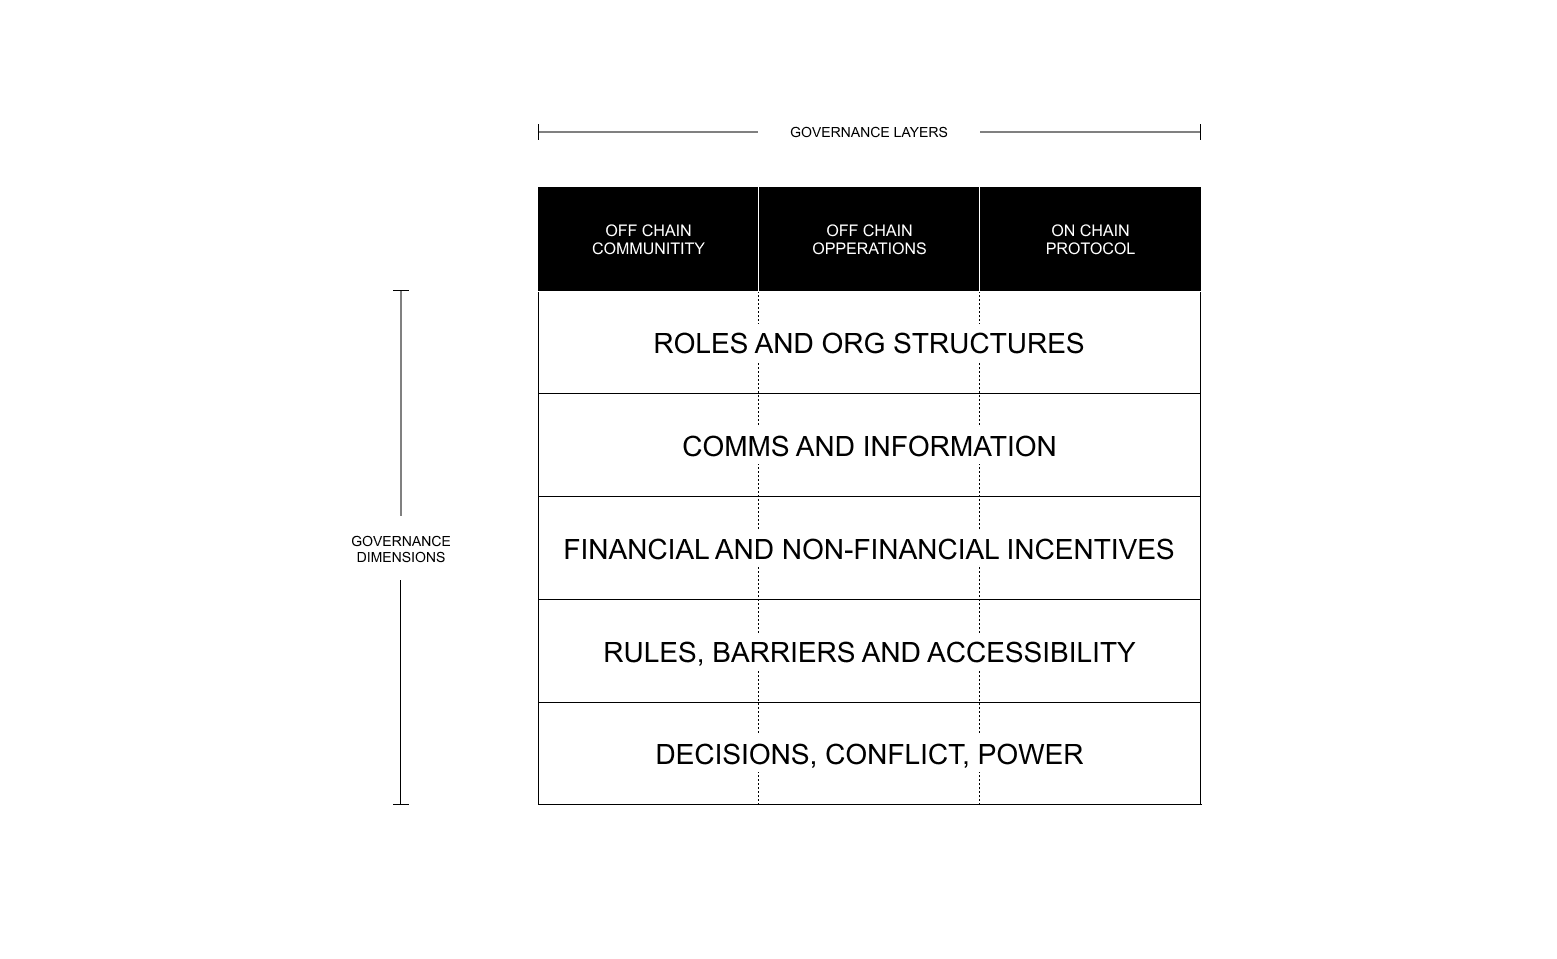 Governance layers and dimensions